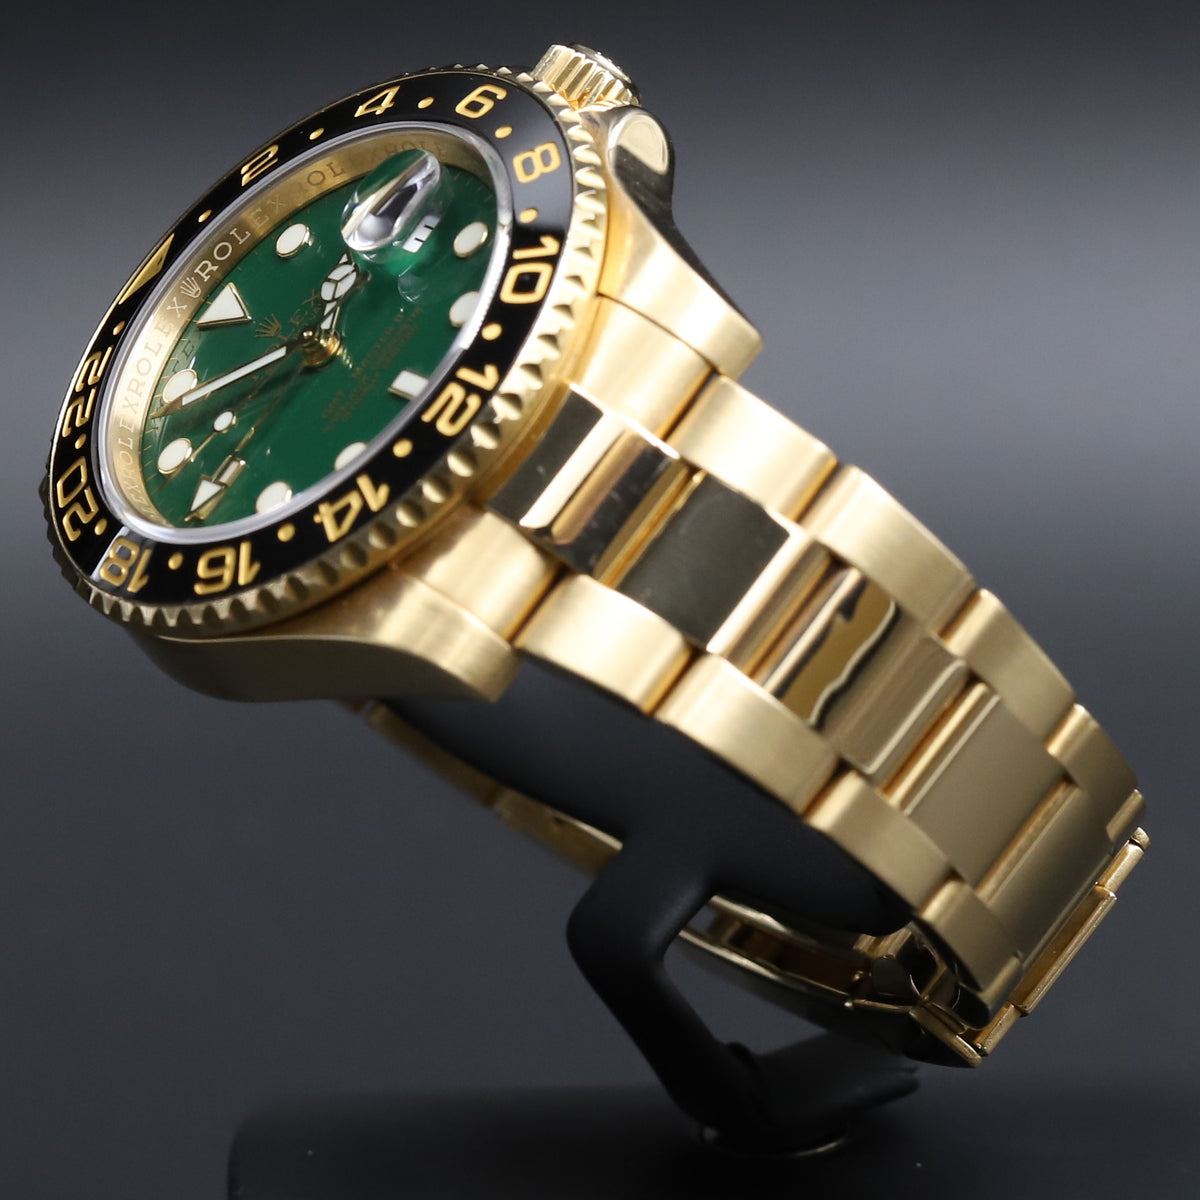 Rolex<br>116718 GMT Master II Green Dial